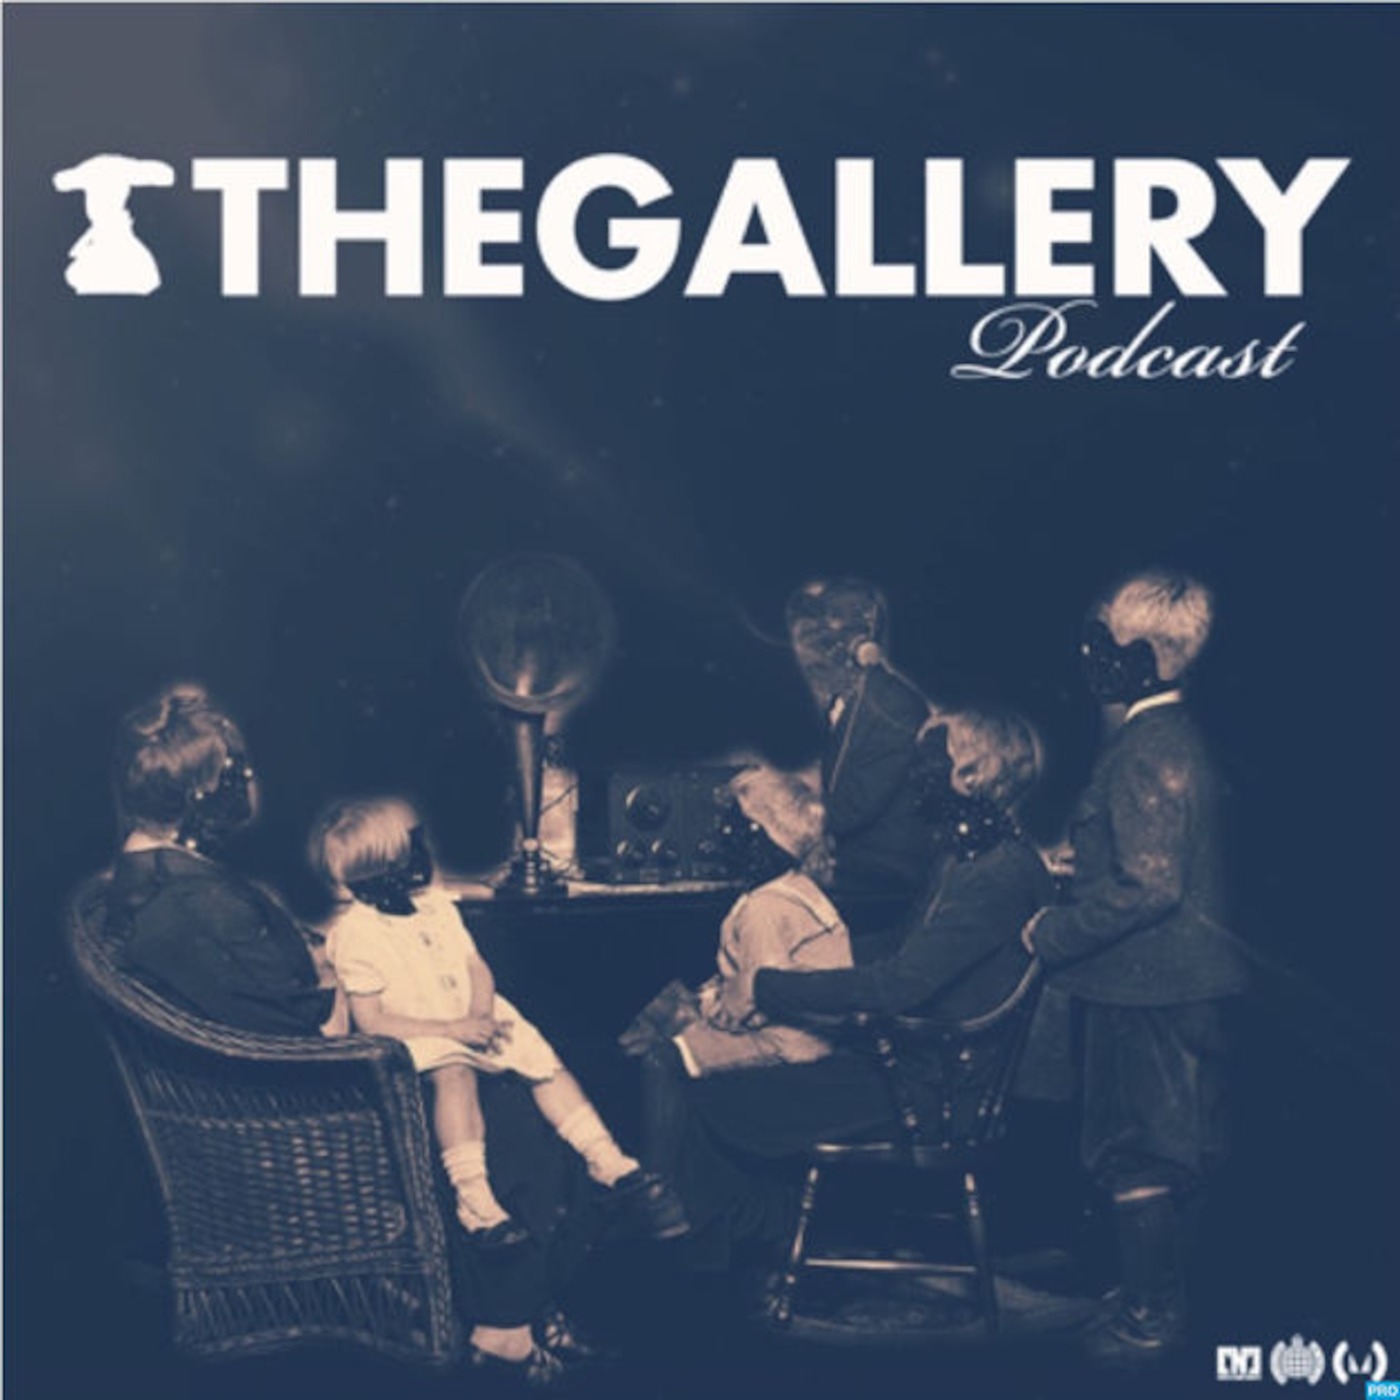 The Gallery Podcast Episode 173 W/ Tristan D + COONE